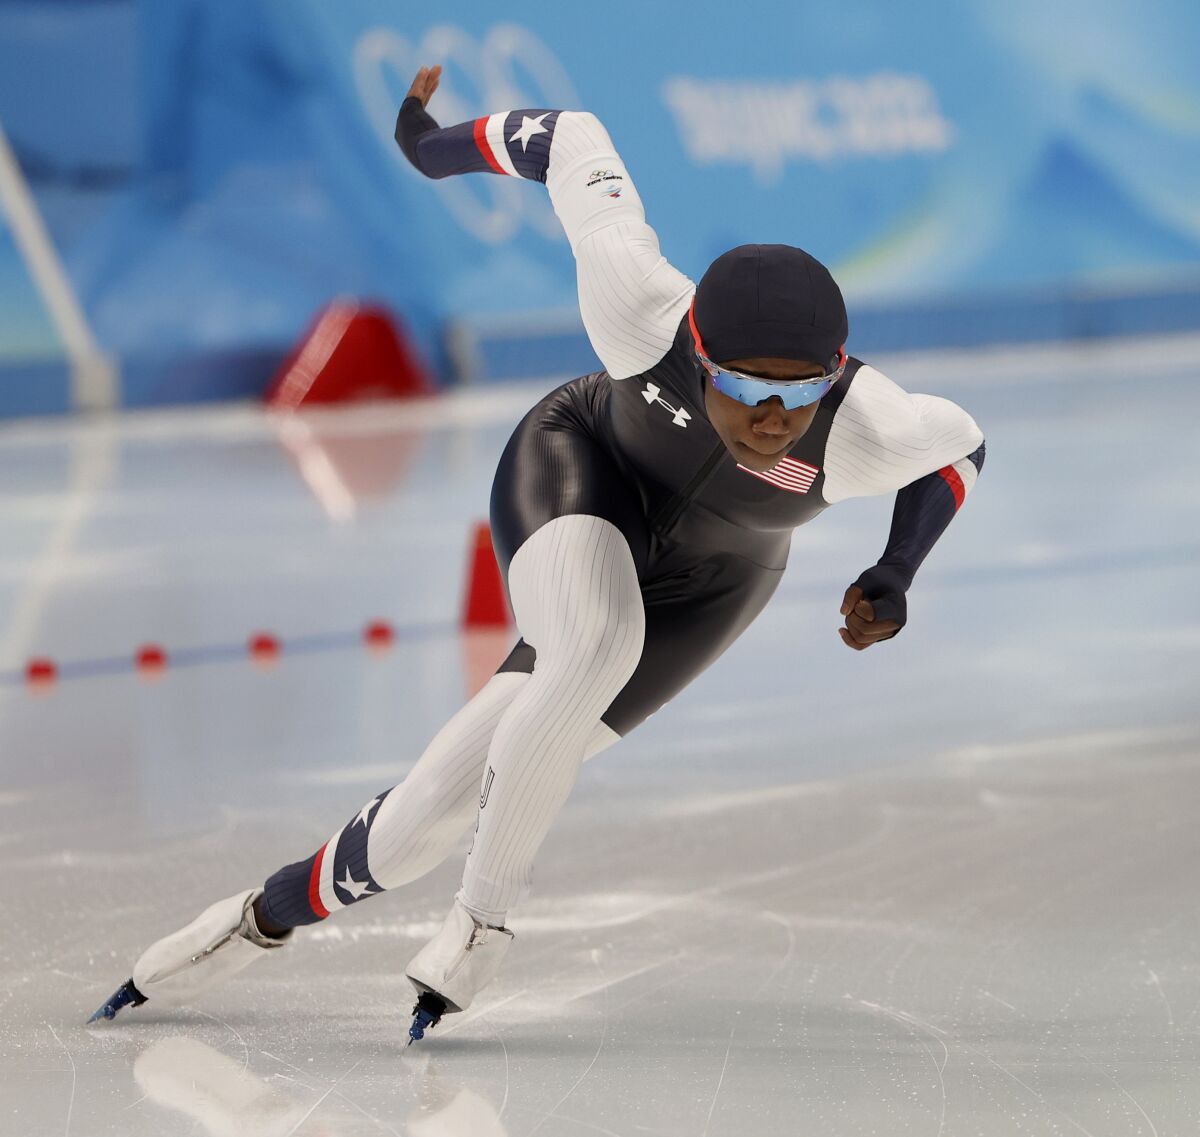 U.S. speedskater Erin Jackson competes in the 500 meters on her way to winning gold in the event.